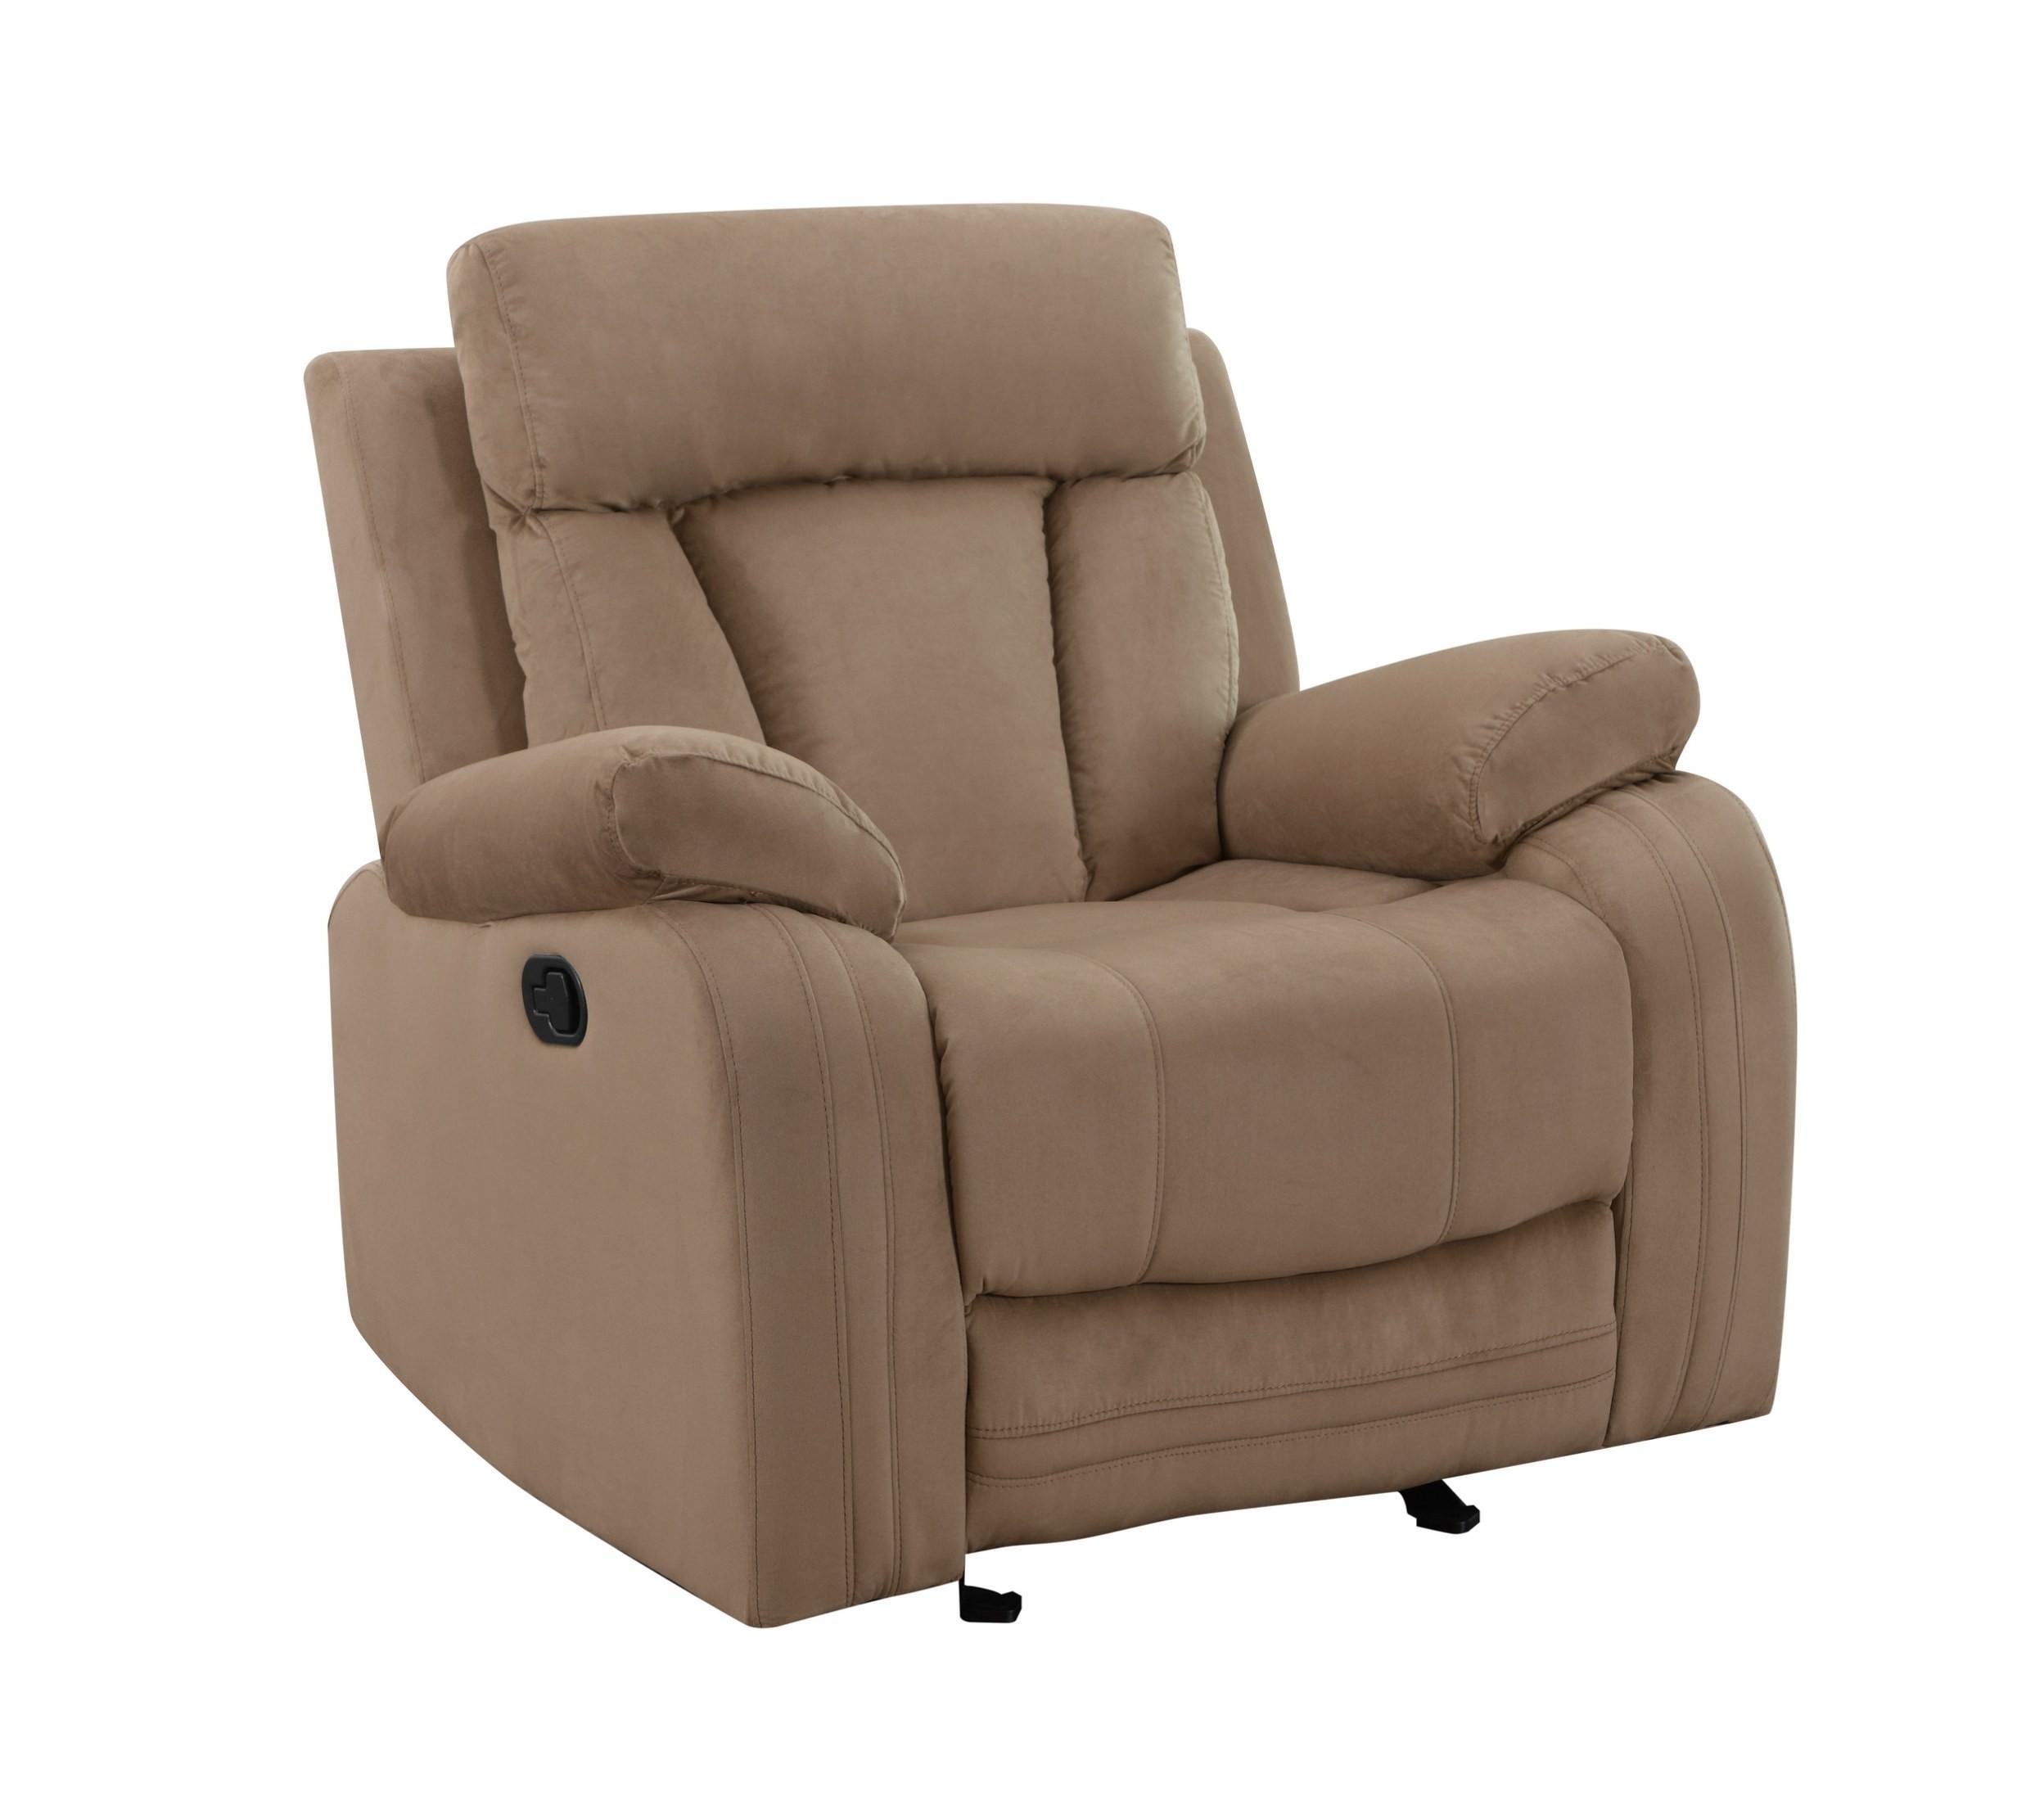 

    
Contemporary Beige Microfiber Recliner Chair Global United 9760
